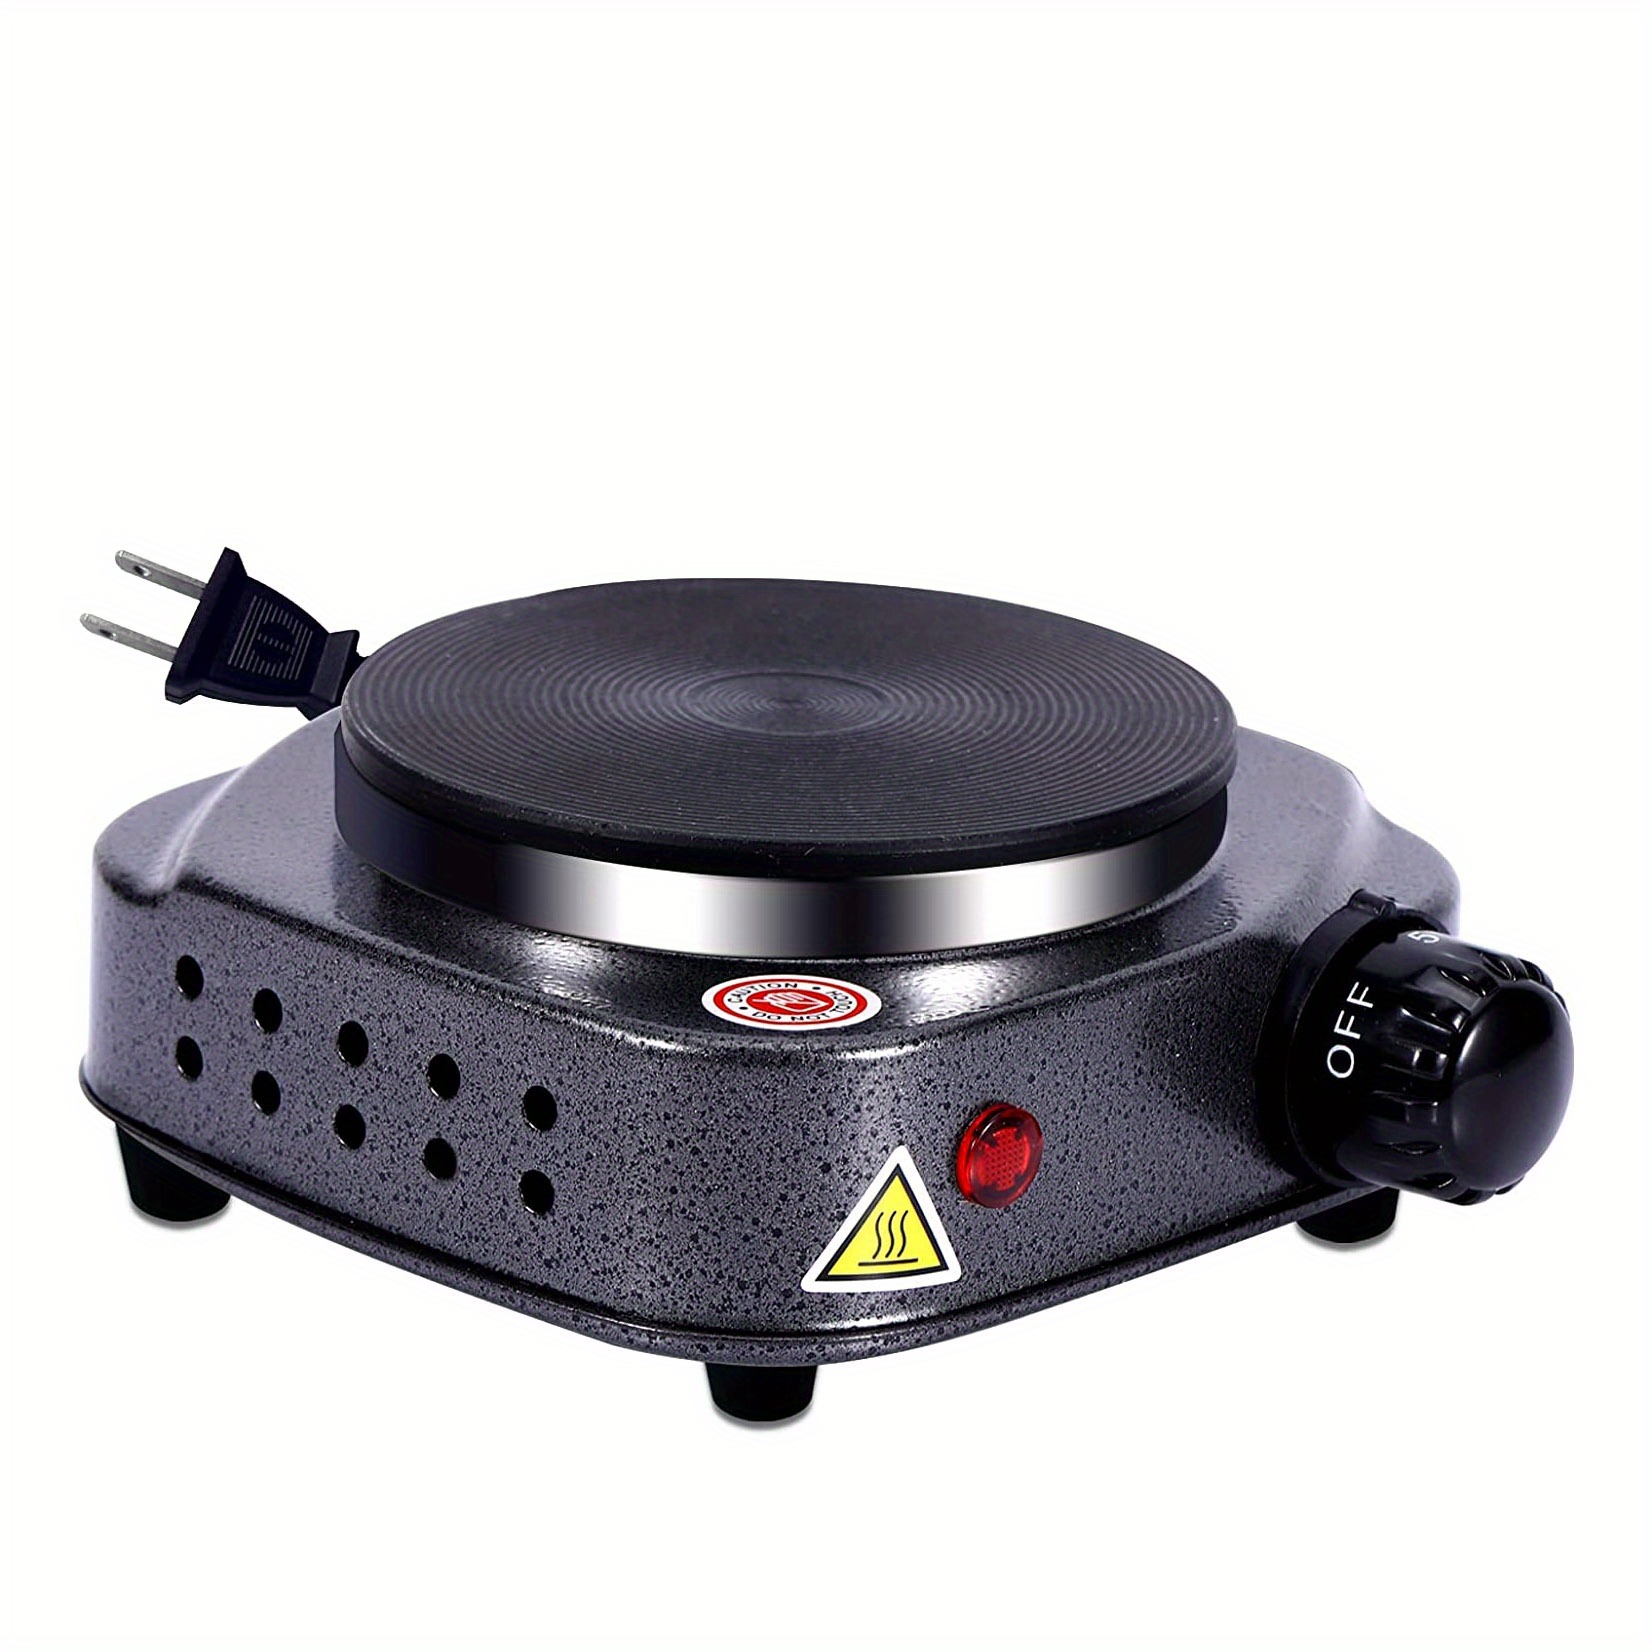 Hot Plate for Candle Making, Black Color Electric Hot Plate for Melting  Wax